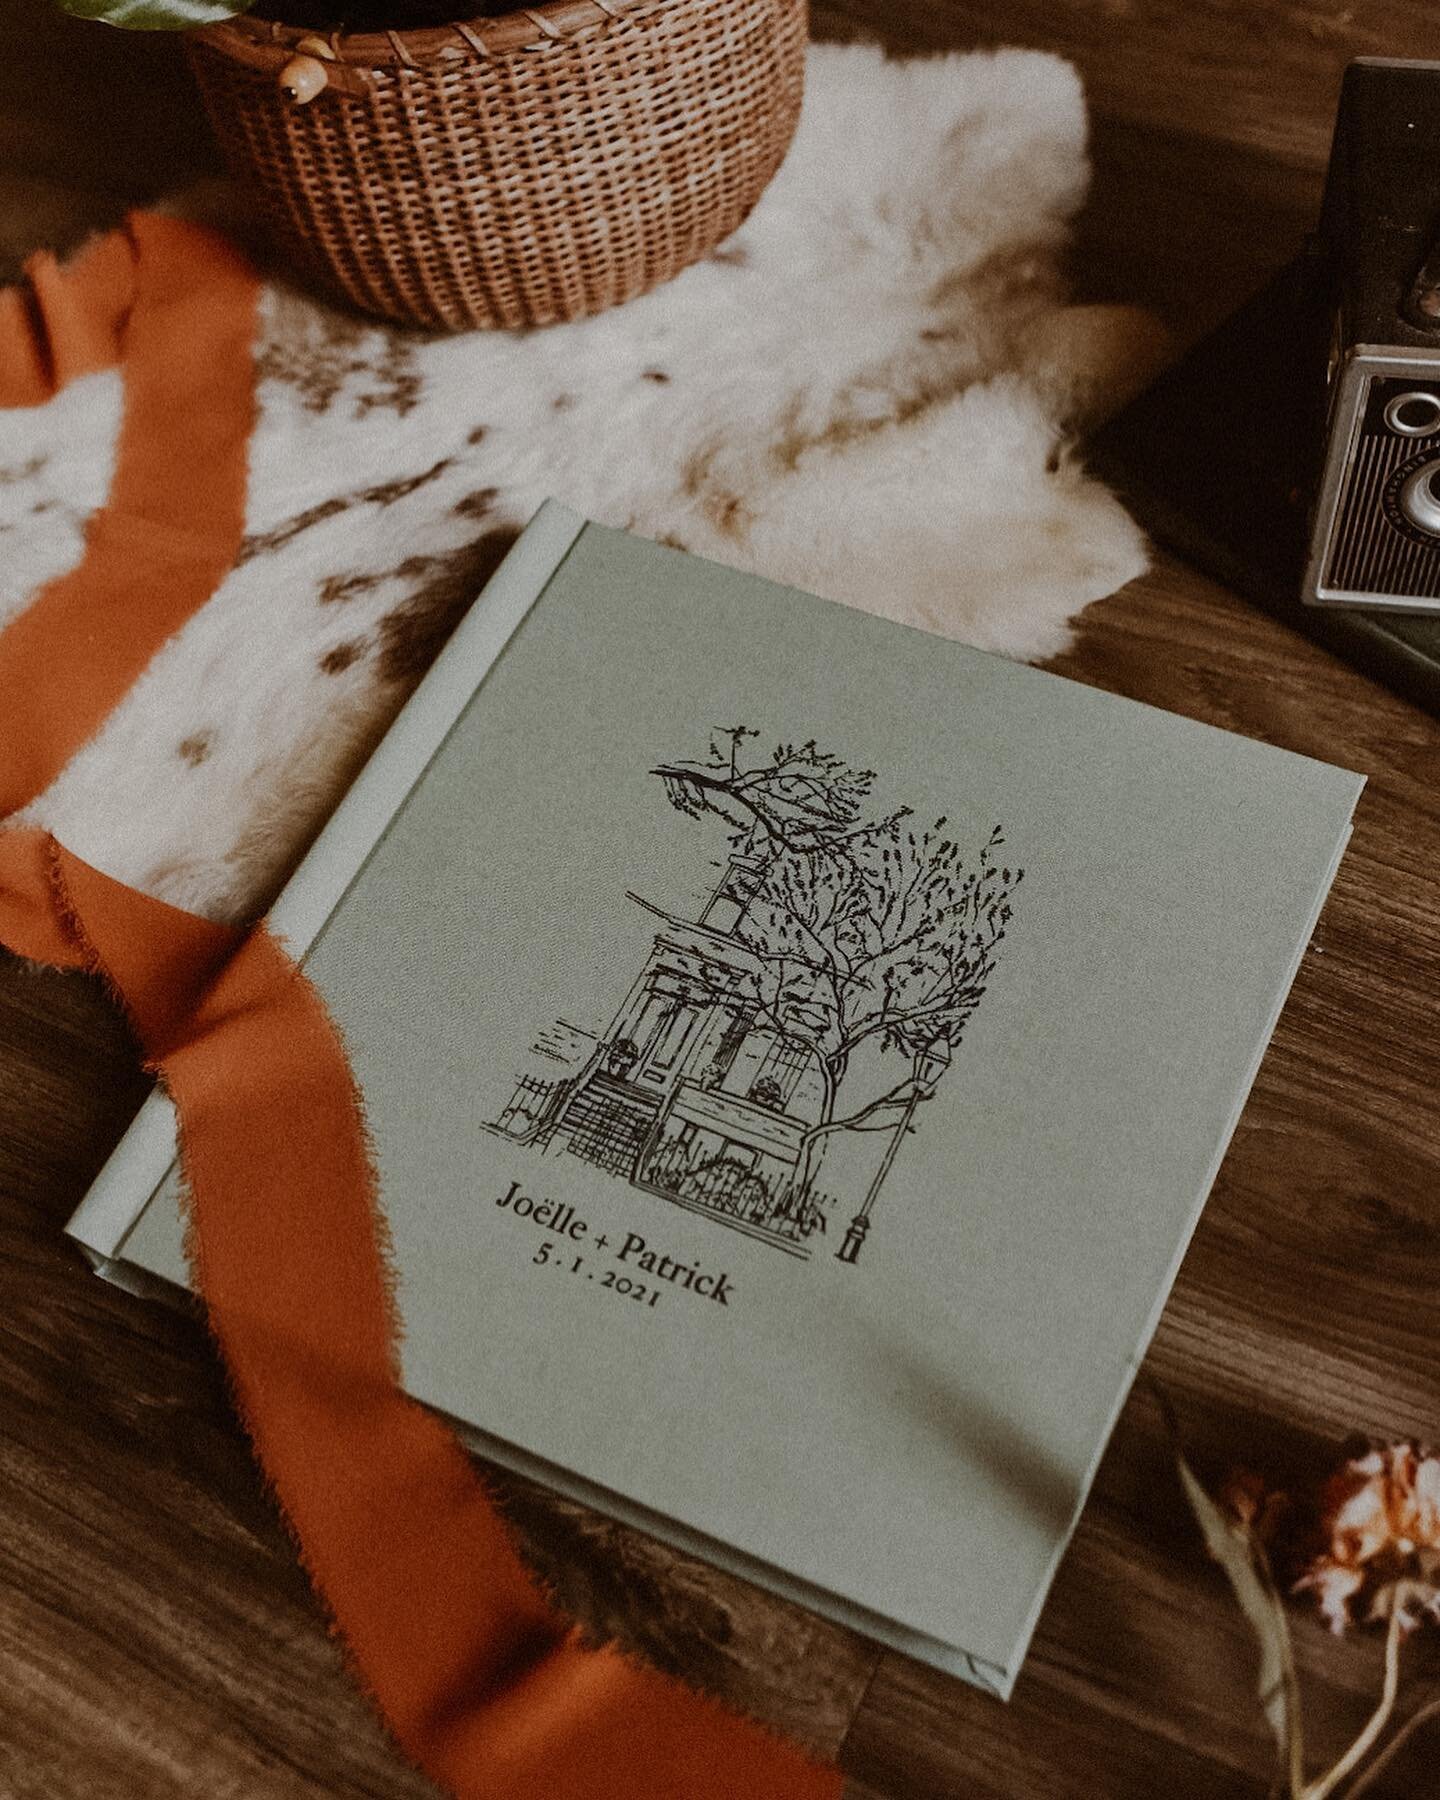 jo&euml;lle &amp; patrick&rsquo;s fine art album that we finalized last year - with a personalized cover in linen fabric and their custom wedding logo (featuring jo&euml;lle&rsquo;s home, where they got married) on the cover. 🥹🖤✨

print your photos